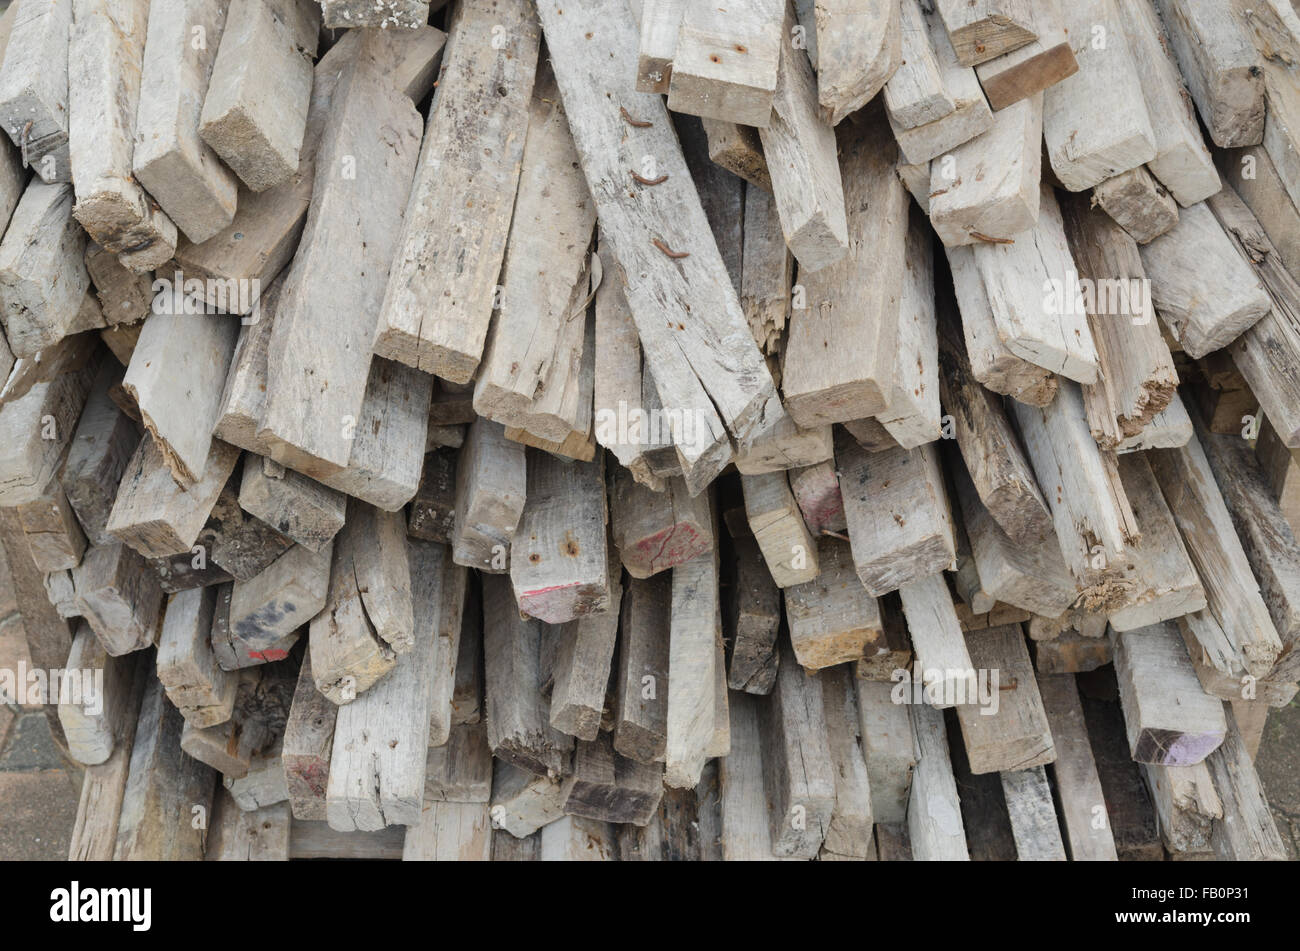 Pile of tree trunks, Lumber pile at construction site wasted wood material for recycling. Stock Photo